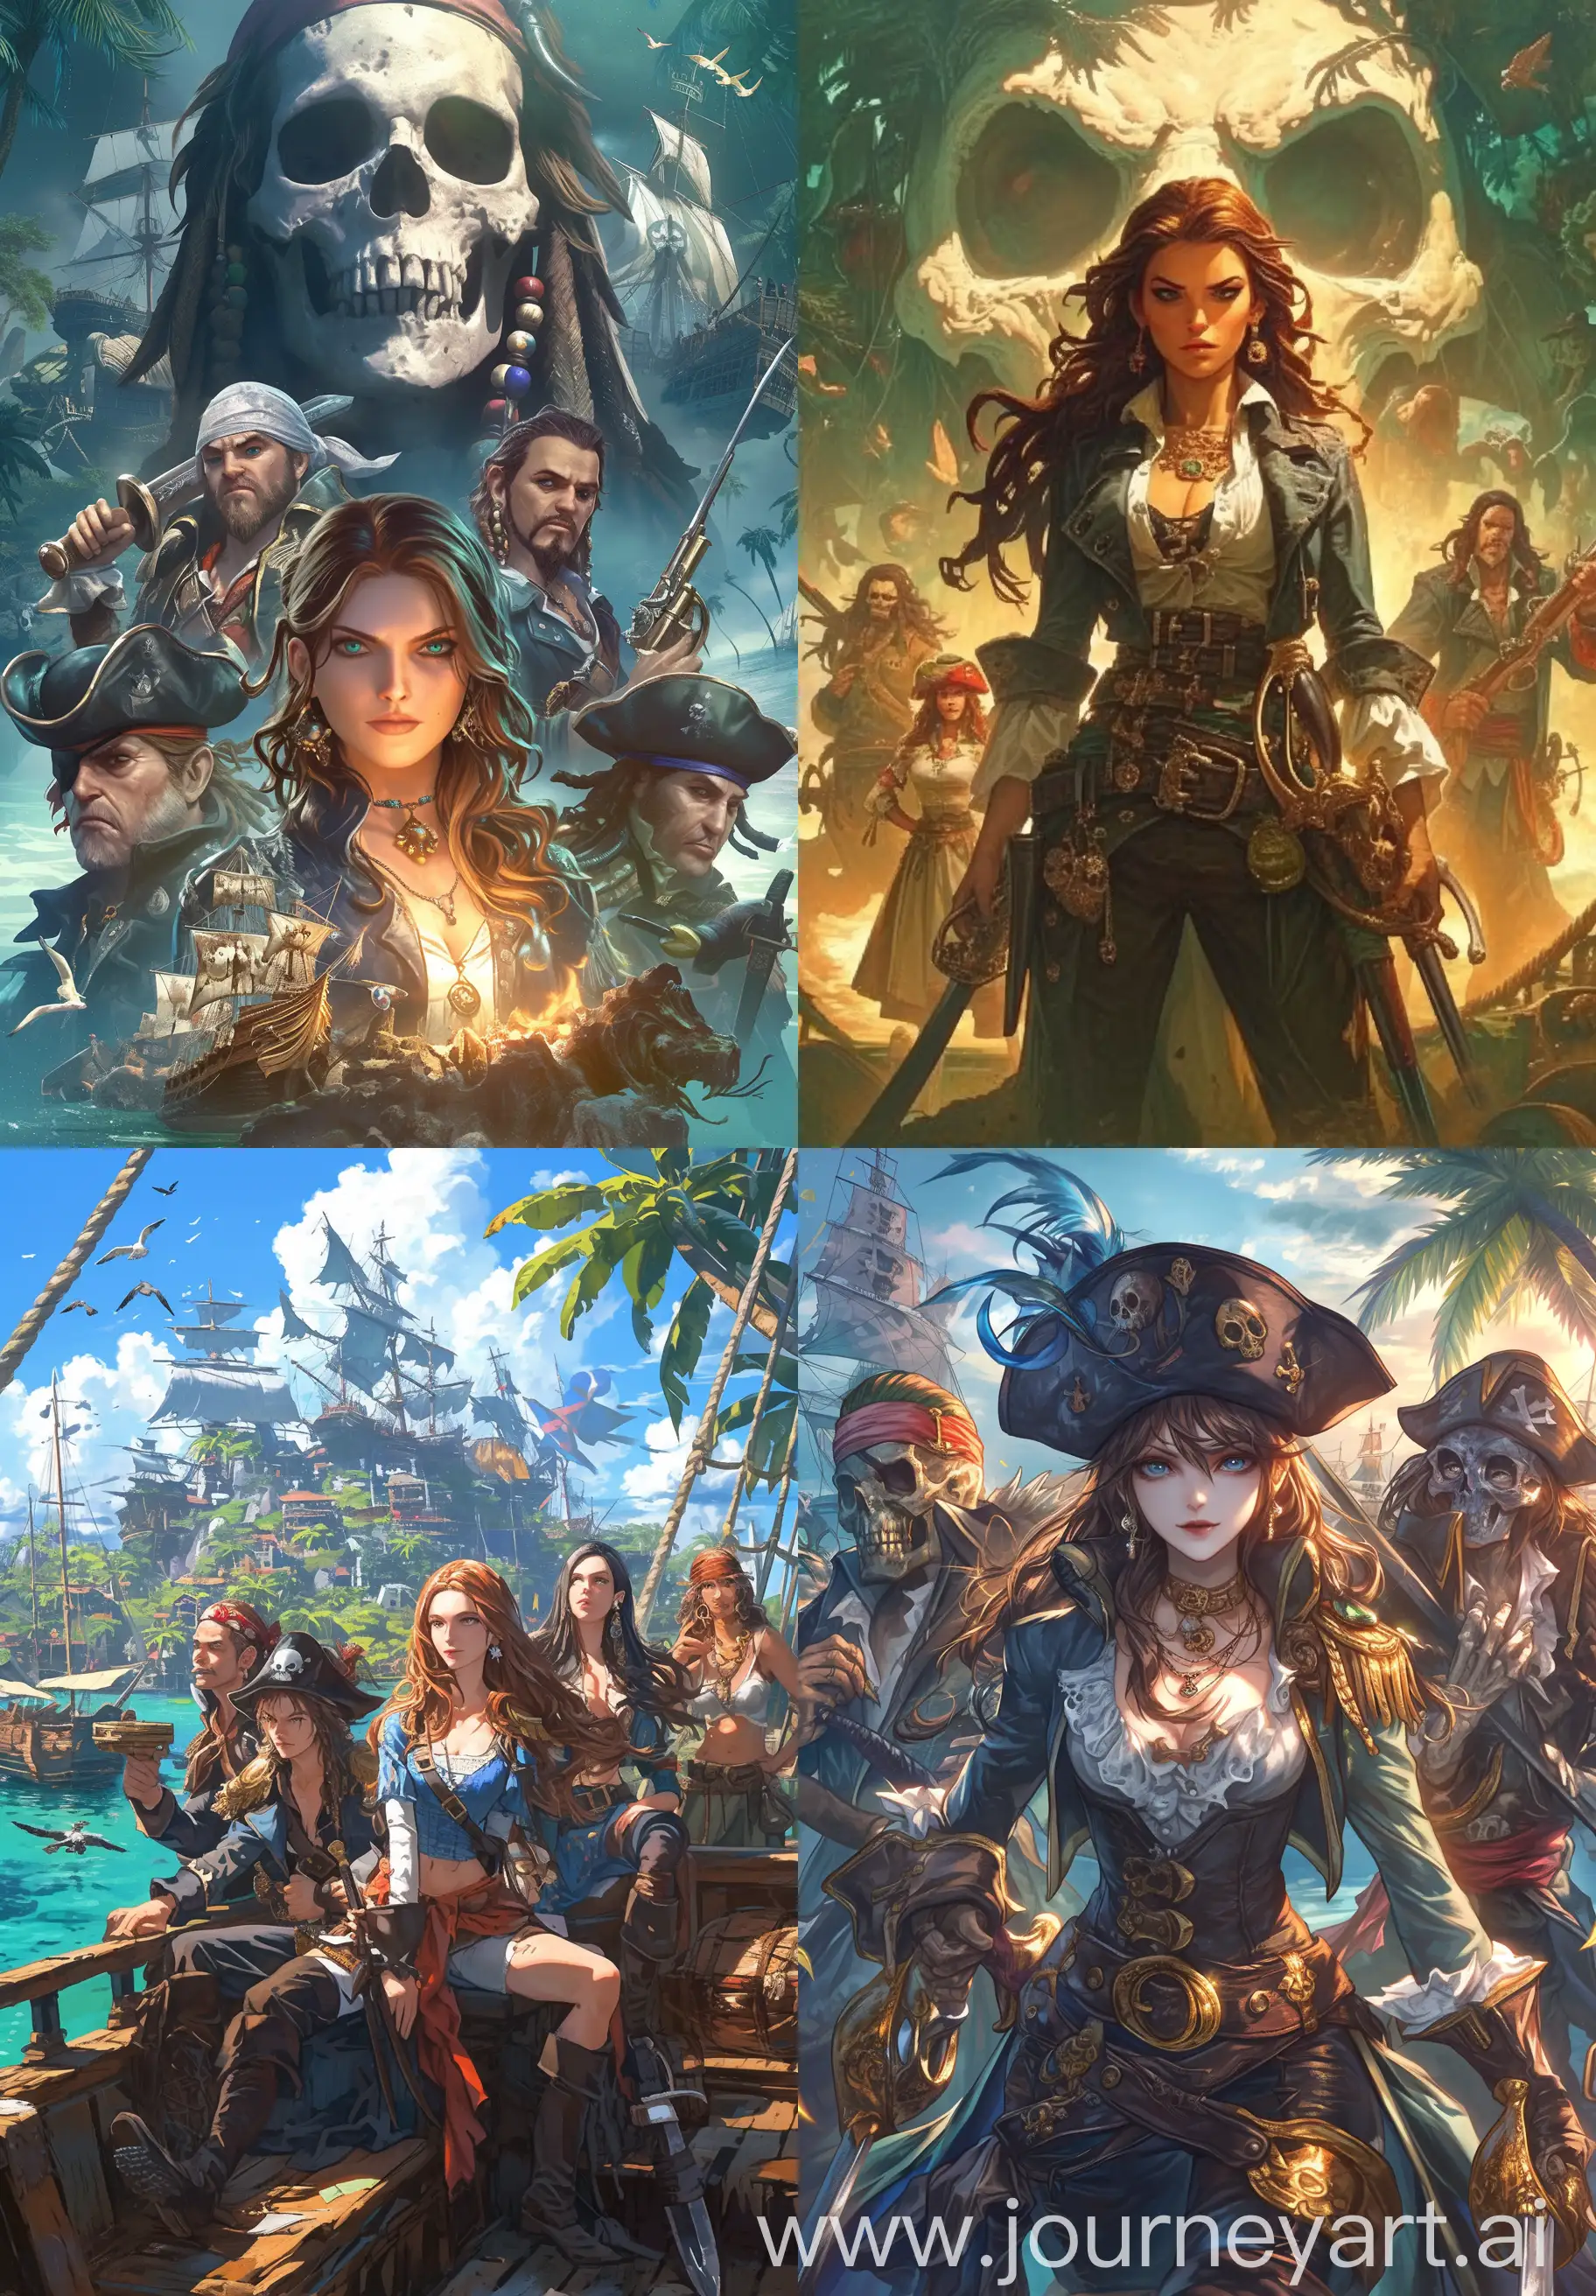 Adventure-of-a-Fearless-Female-Pirate-Captain-Quest-for-Treasure-on-Skull-Island